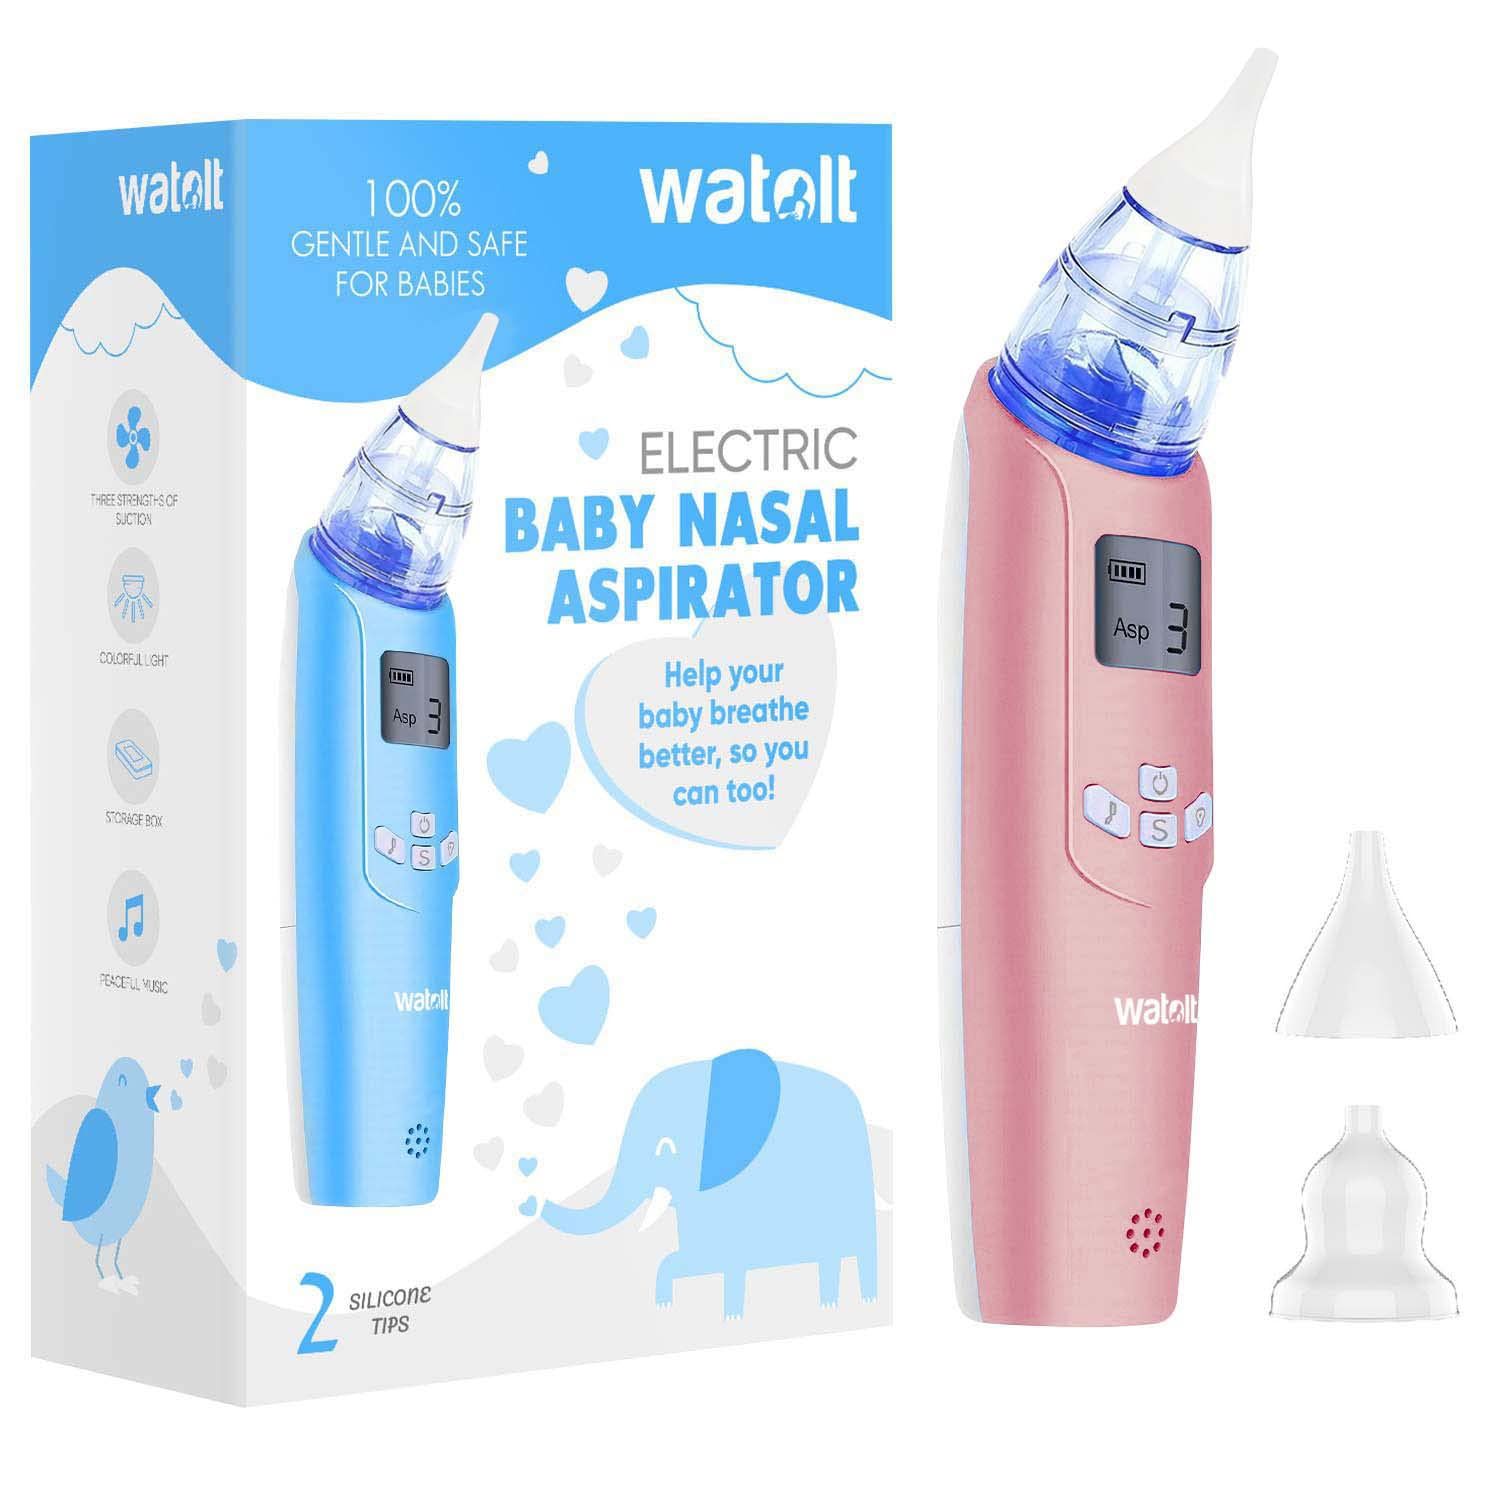 Watolt Baby Nasal Aspirator - Electric Nose Suction for Baby - Automatic Booger Sucker for Infants - | Amazon (US)